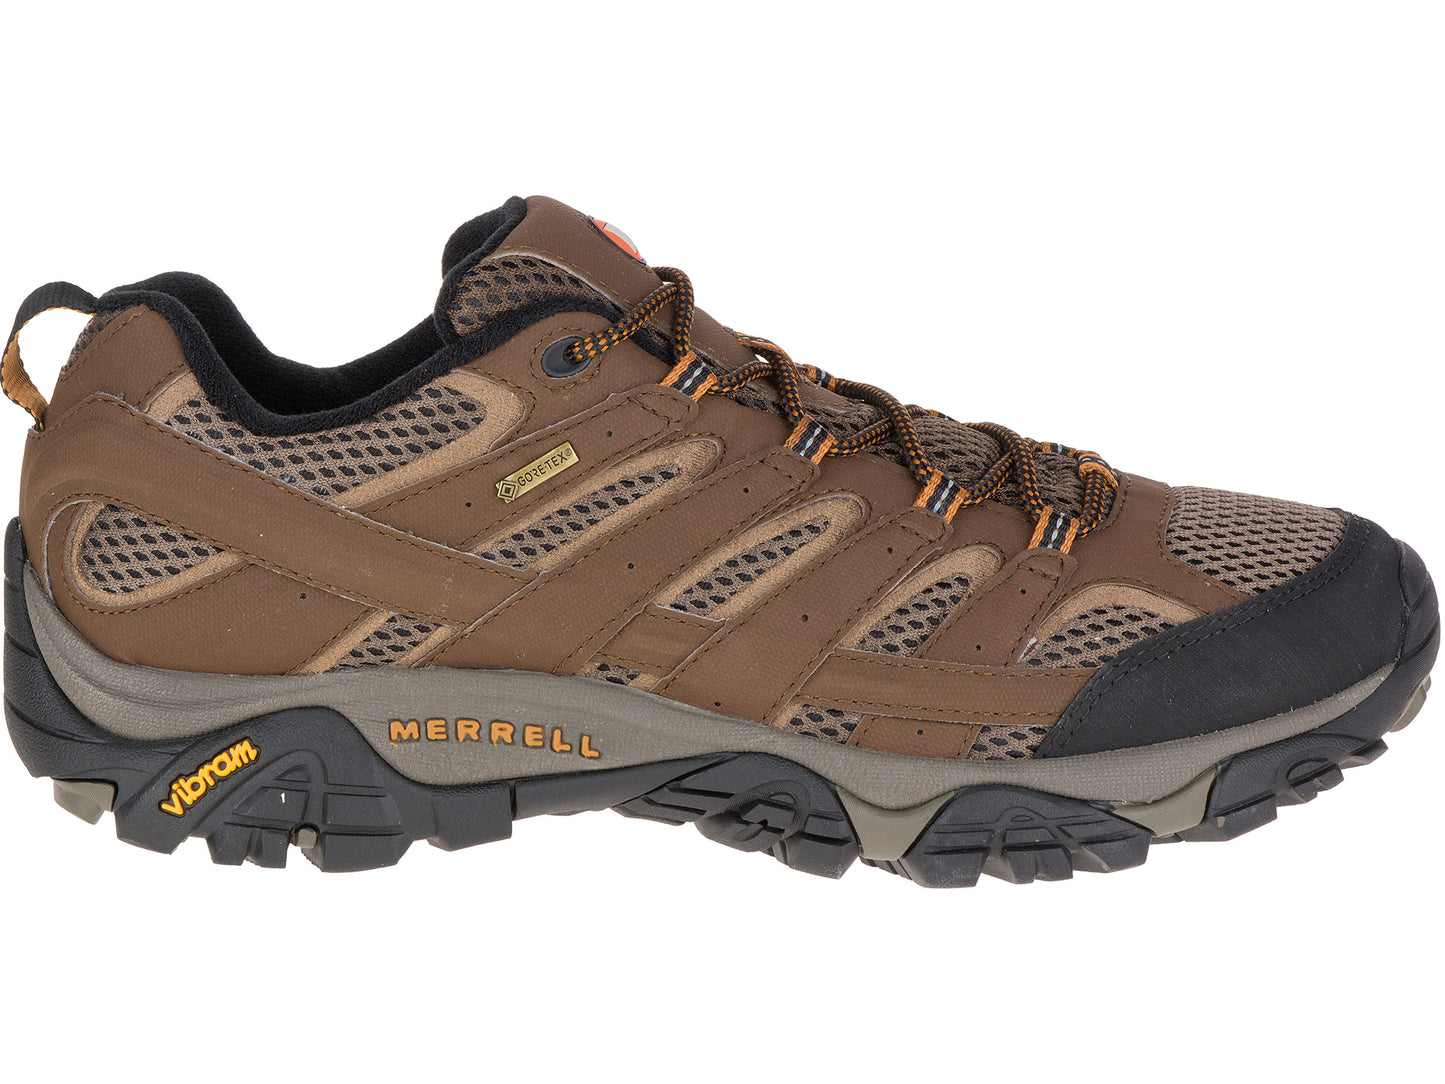 Moab 2 Gore Tex Hiking Shoes Wide Width